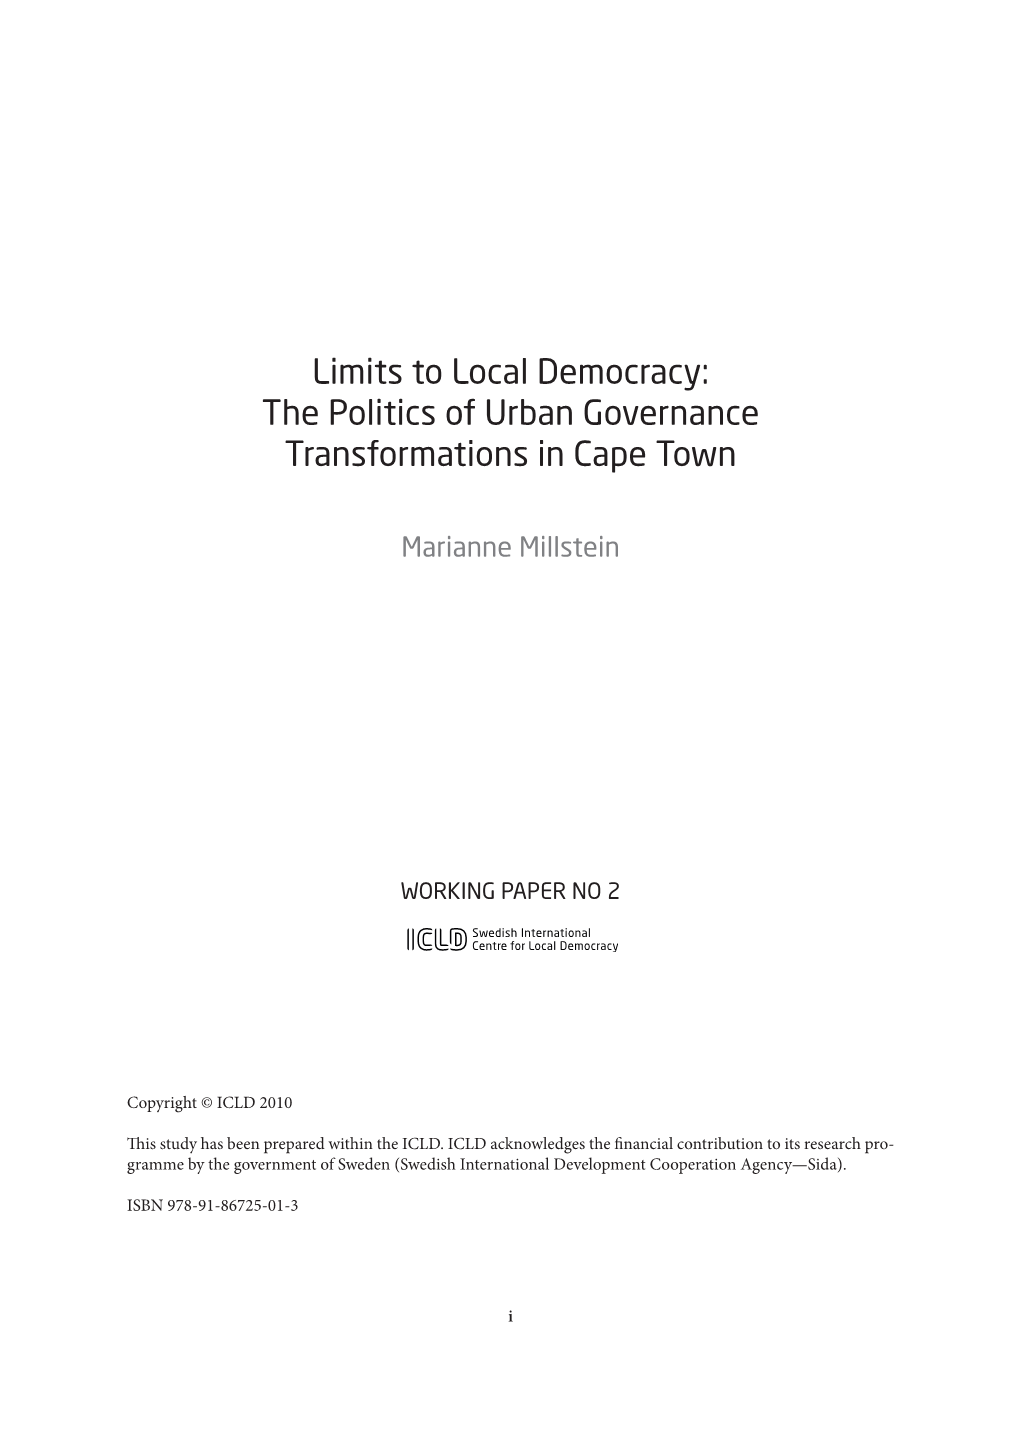 Limits to Local Democracy: the Politics of Urban Governance Transformations in Cape Town